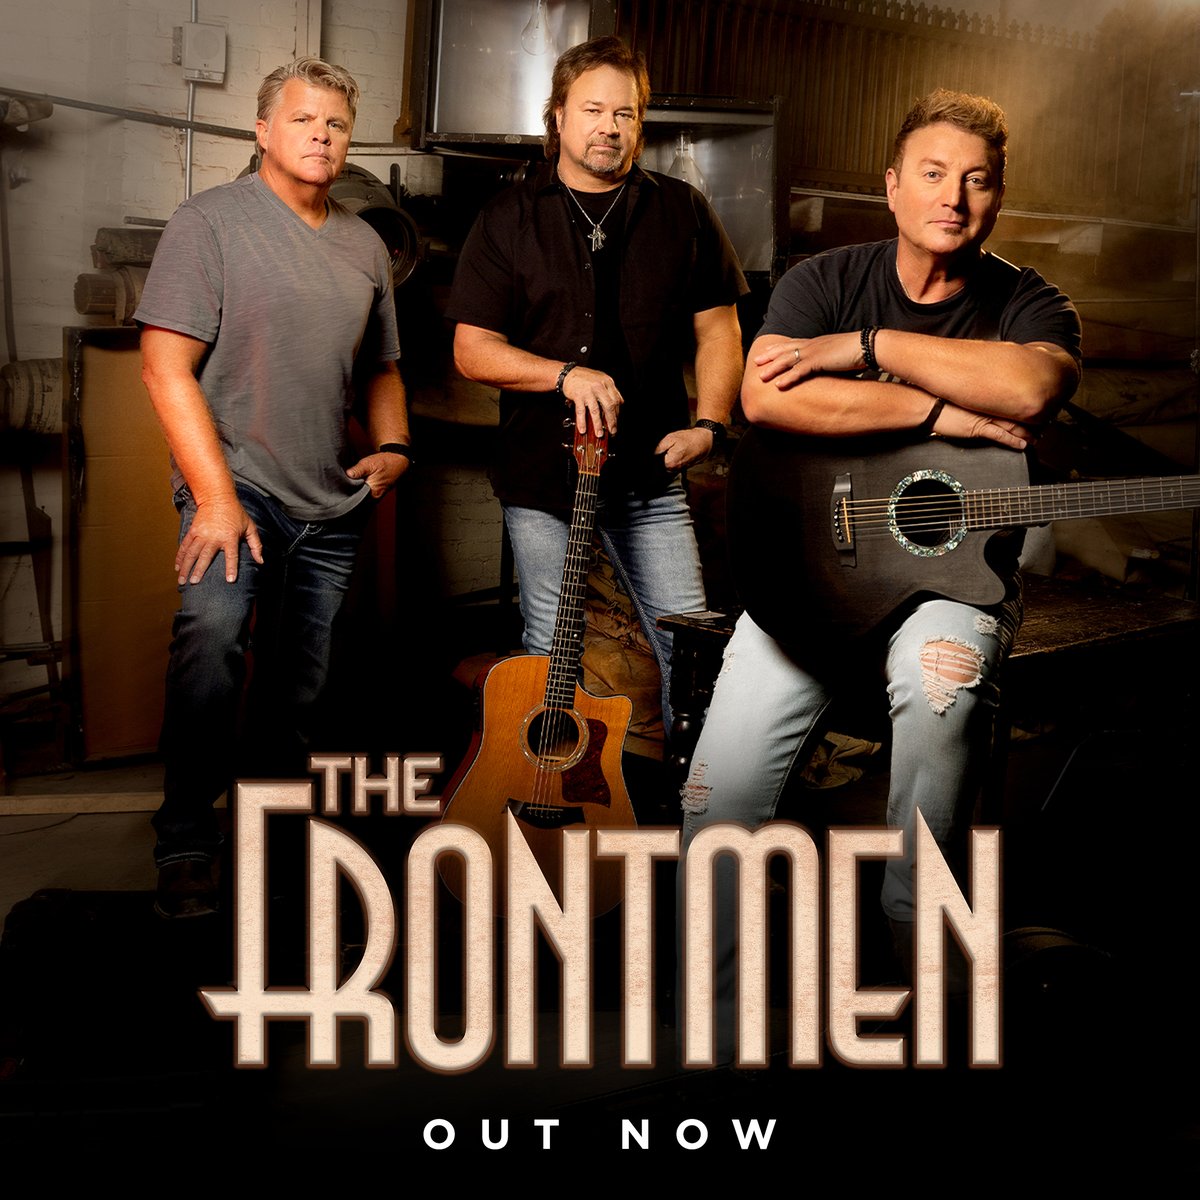 The Frontmen Album is officially OUT NOW! Download it here at TheFrontmen.lnk.to/thefrontmenalb… #TheFrontmenAlbum #NewAlbum #countrymusic #thefrontmen #BMGNashville #richiemcdonald #larrystewart #timrushlow